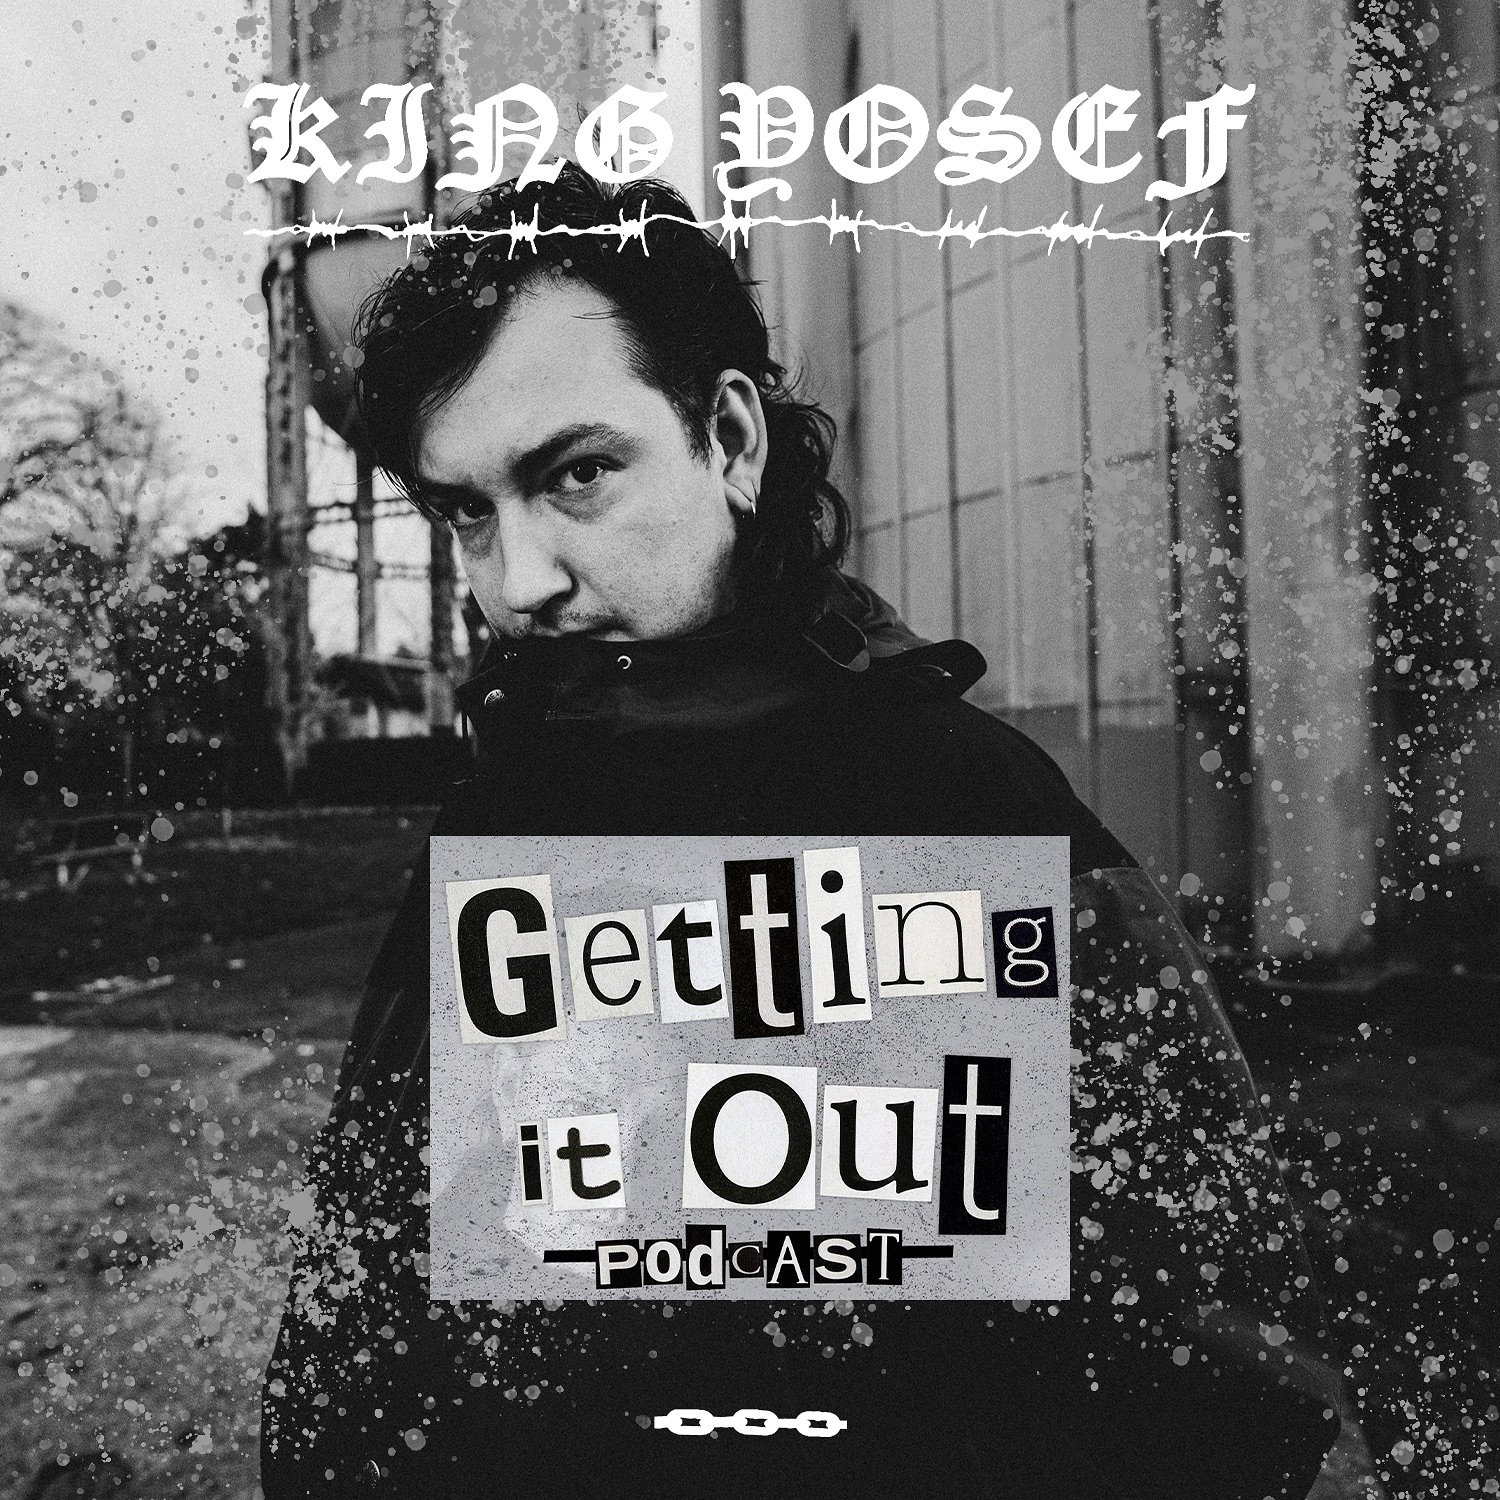 Fire up the new episode of the great @getting_it_out_podcast for a spirited chat with the one and only @kingyosef, out now!

Fresh off a US tour with @_health_ and @_pixelgrip_, Yosef is now finishing up a European tour that included a slot on @roadb